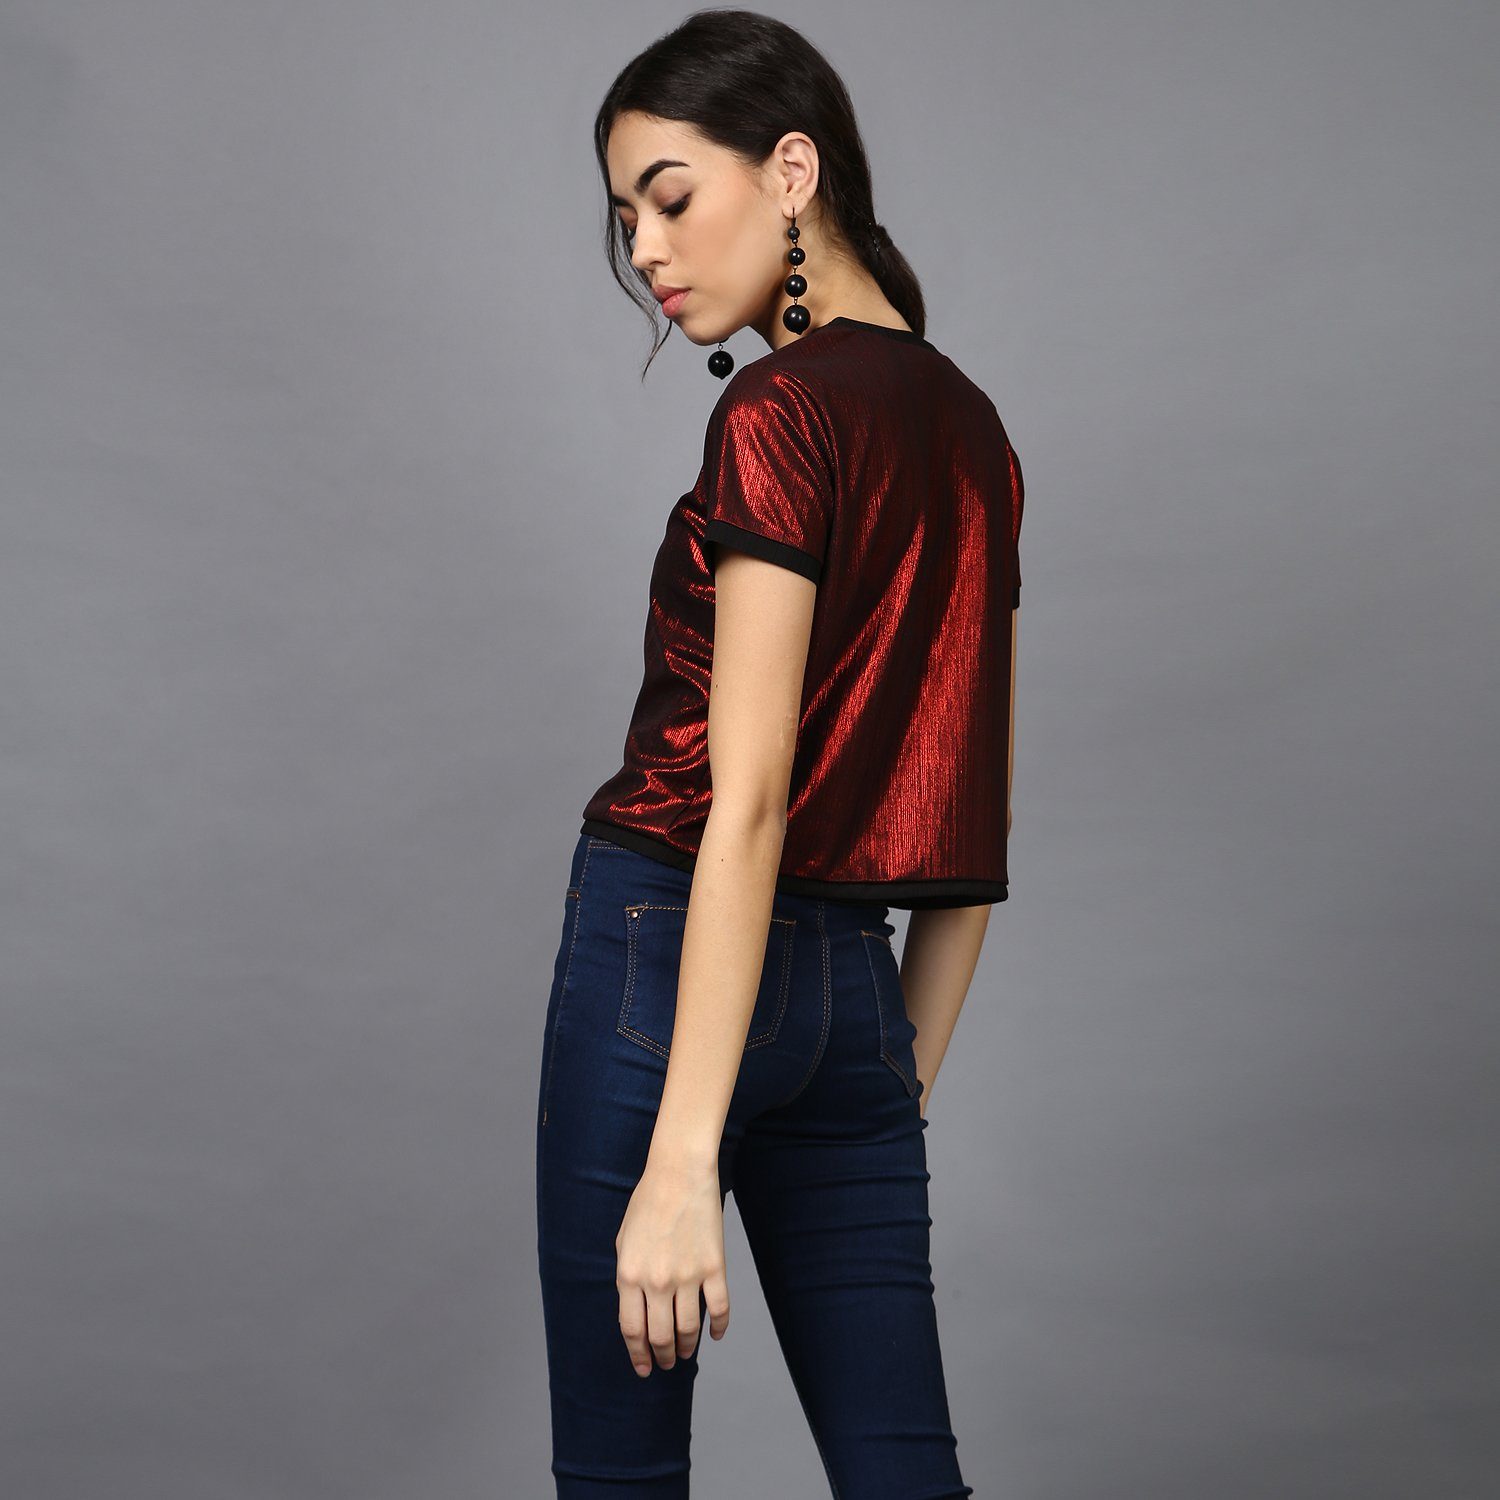 Red Metallic Crop Top with Contrast Rib